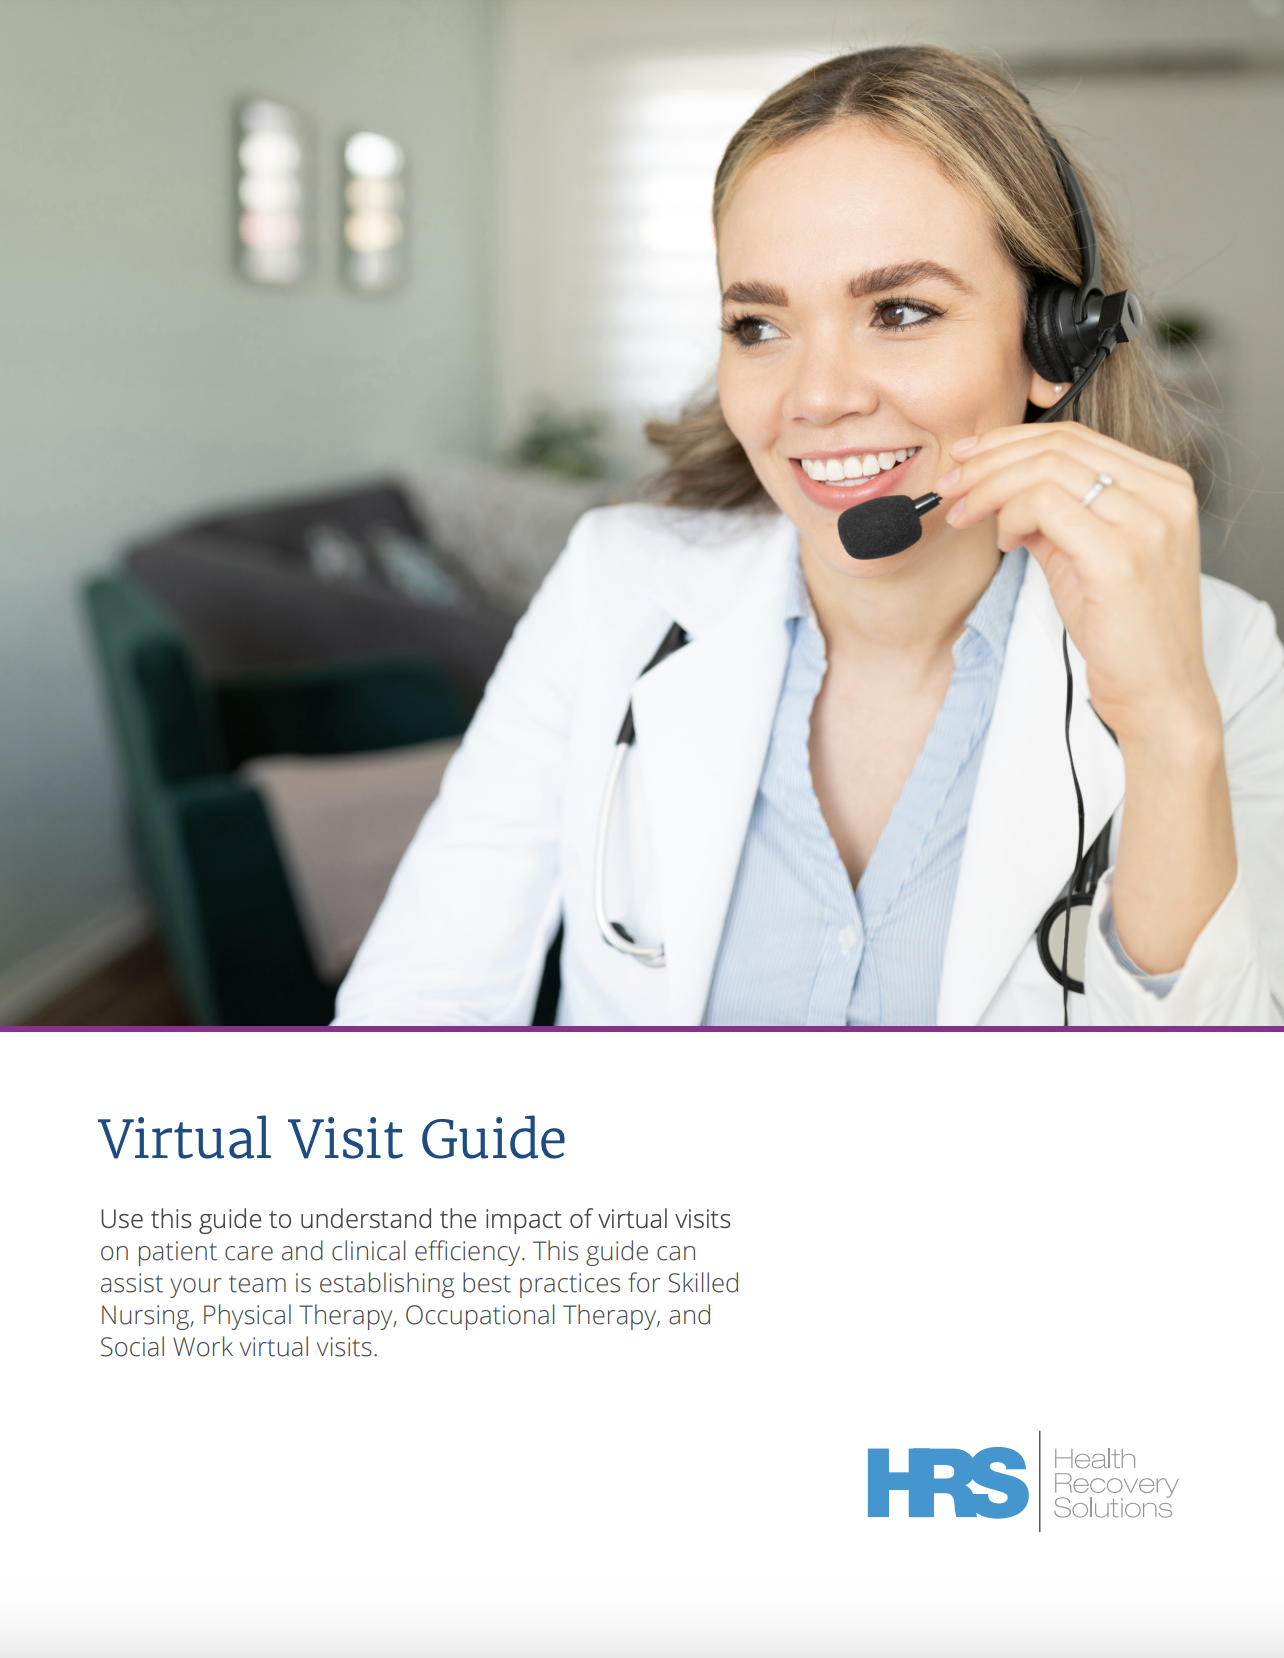 A preview of the cover page of the Virtual Visit Guide from HRS. The image features a nurse with a headset conducting a video conference call.